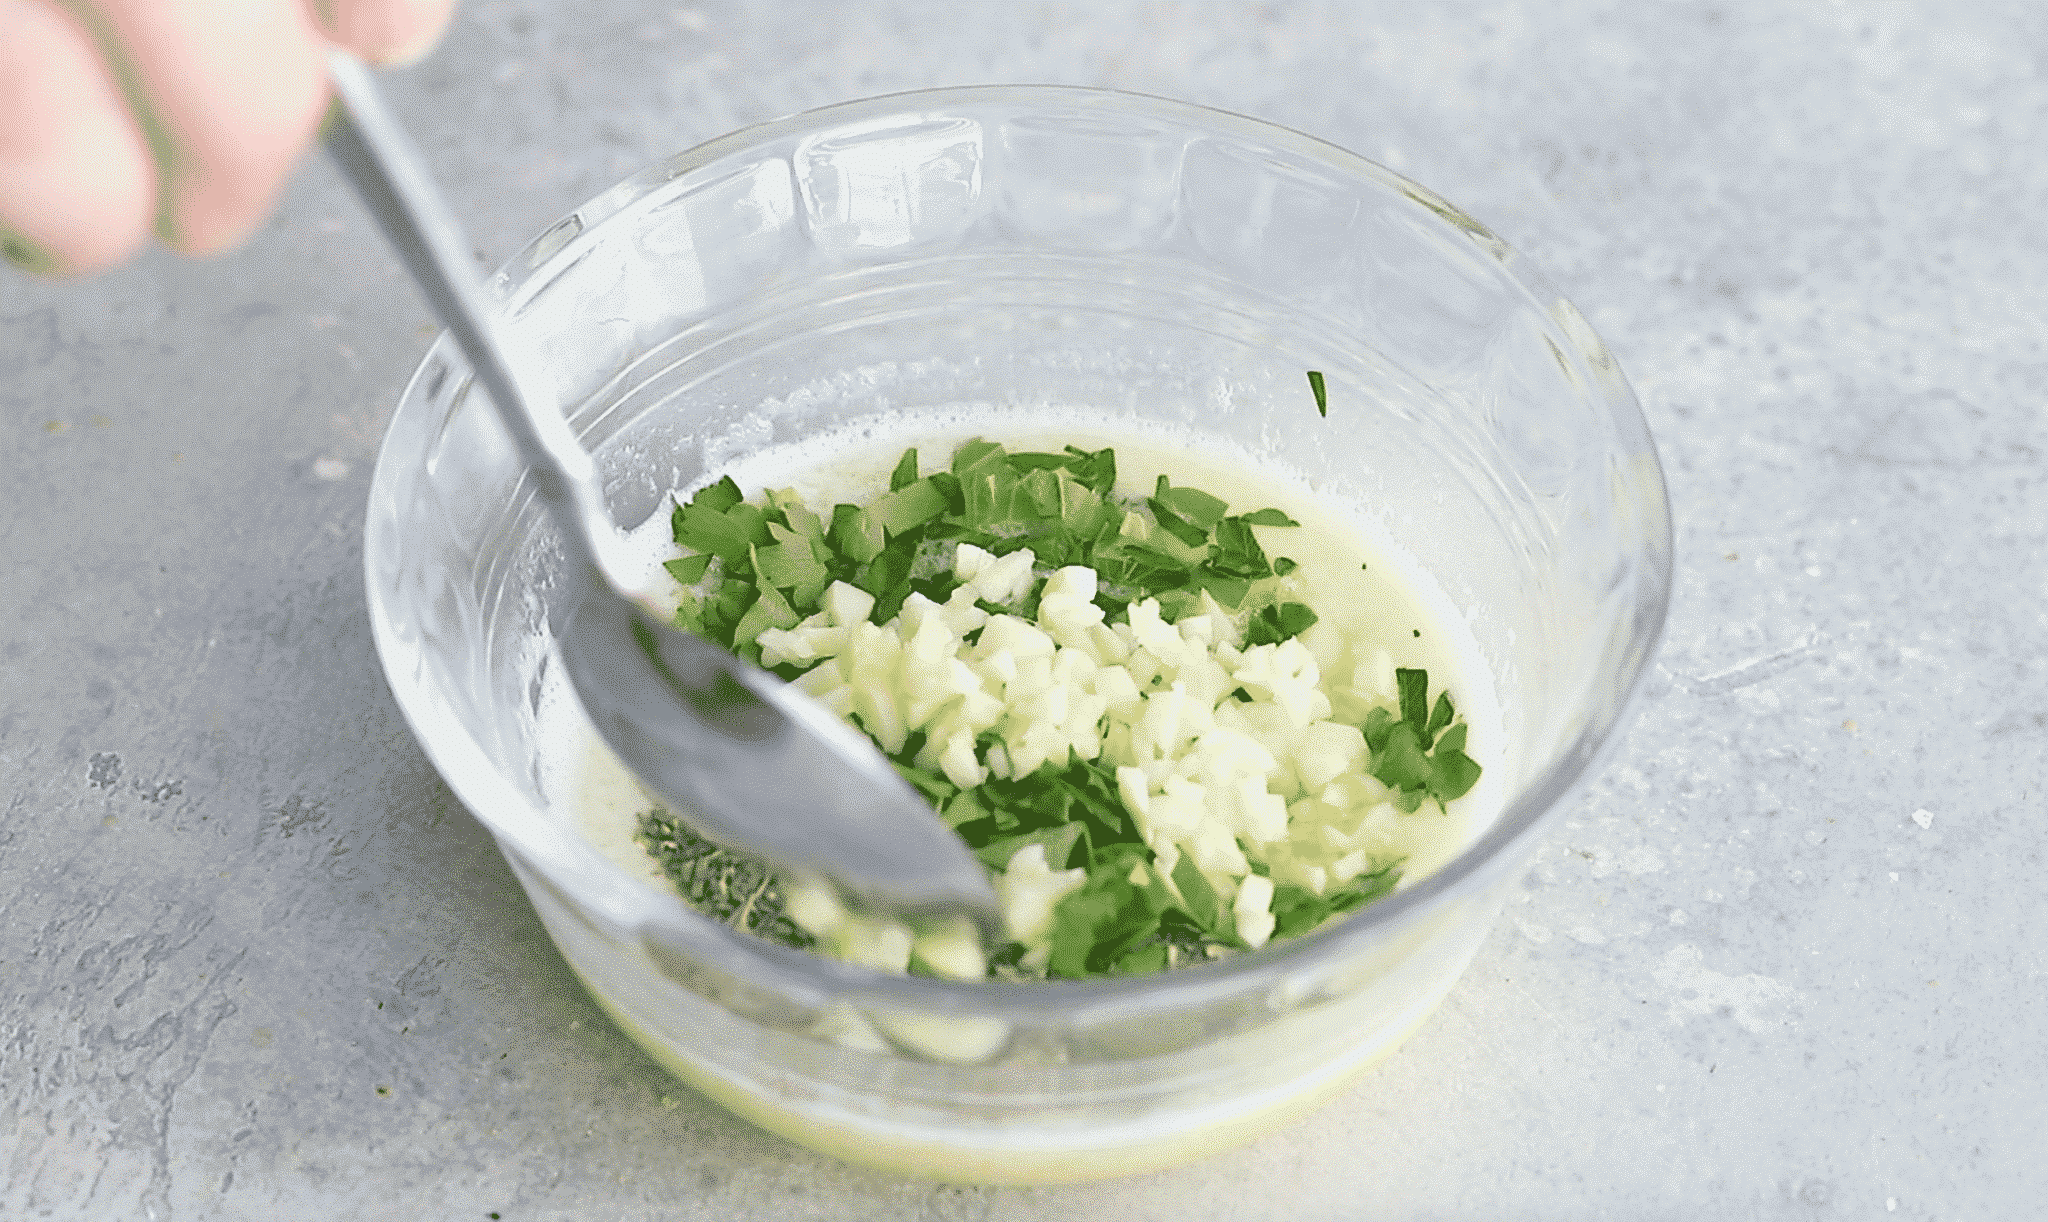 A small glass bowl of melted butter, garlic and parsley